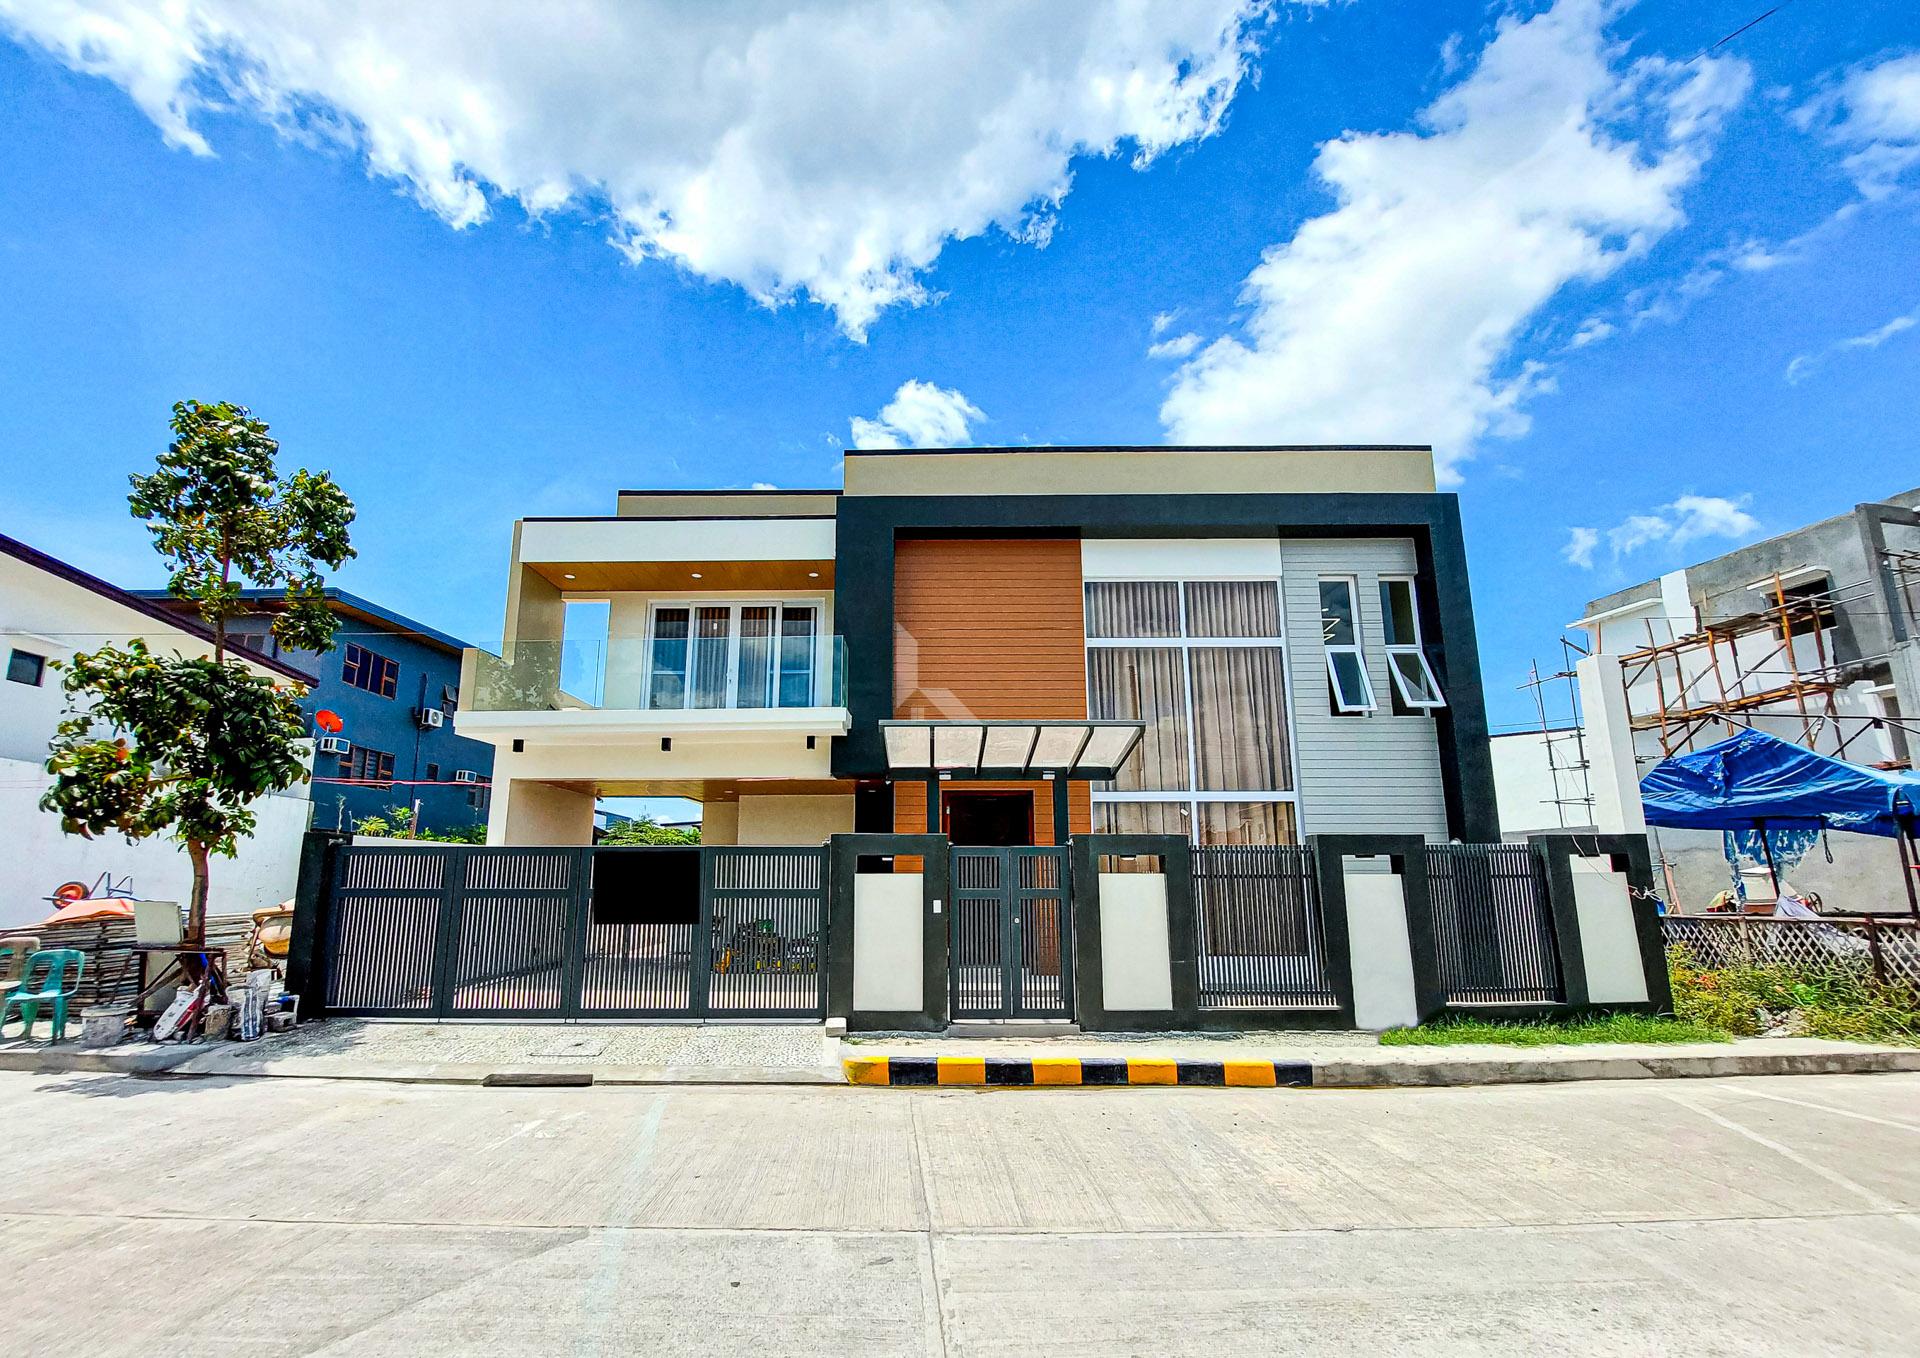 Astounding Brand New Modern Contemporary House and Lot For Sale in Greenwoods Executive Village, Pasig City